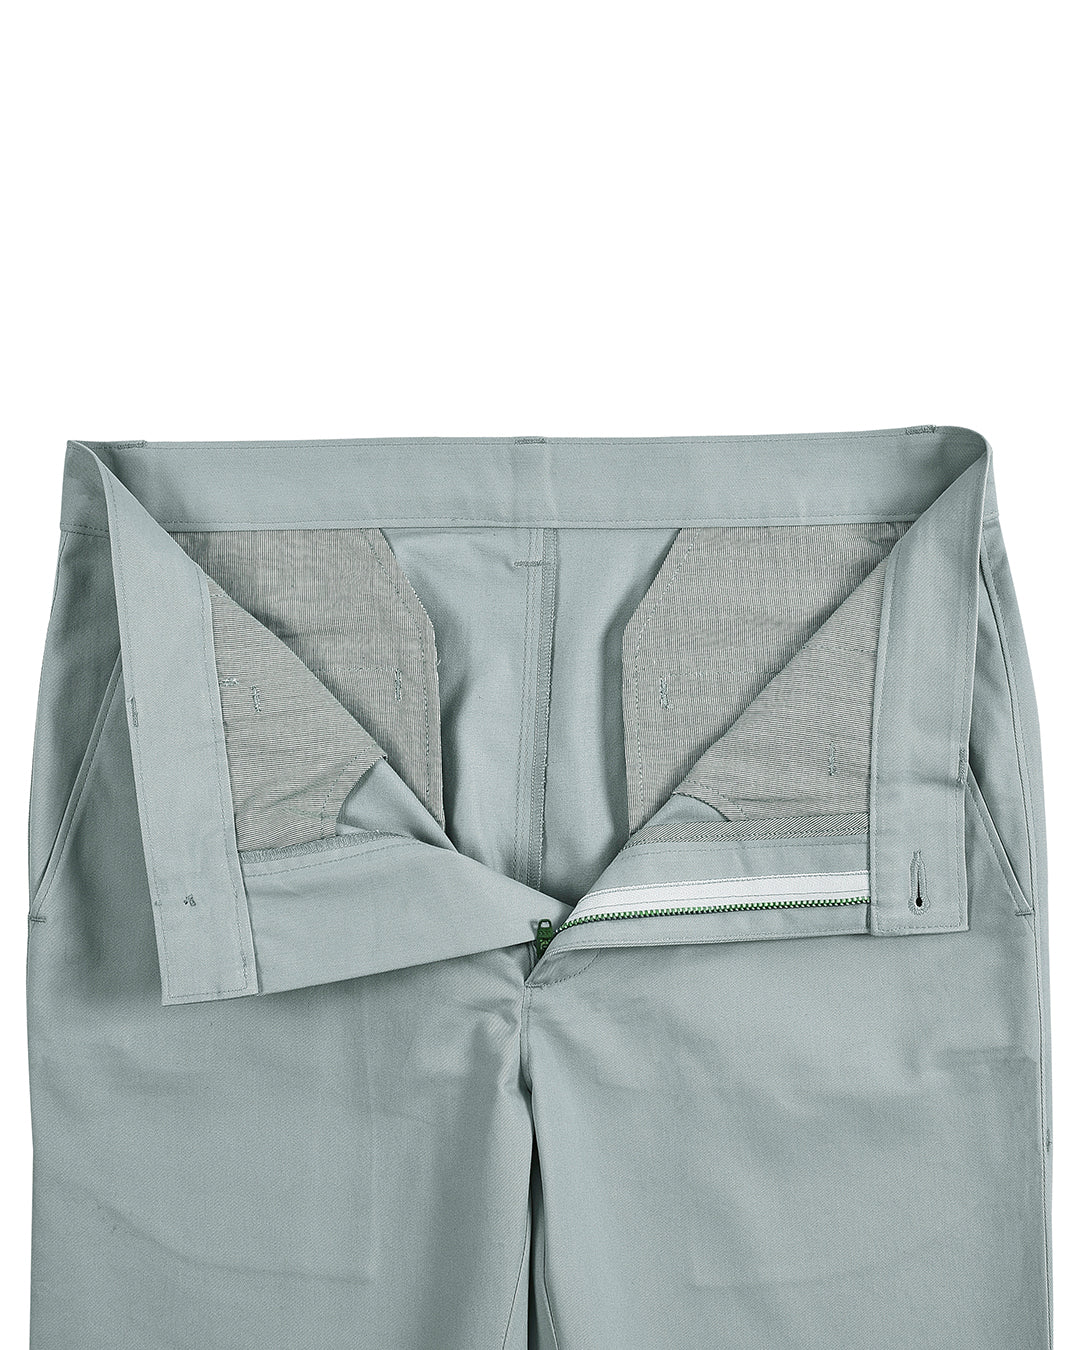 Open front view of custom Genoa Chino pants for men by Luxire in sage green